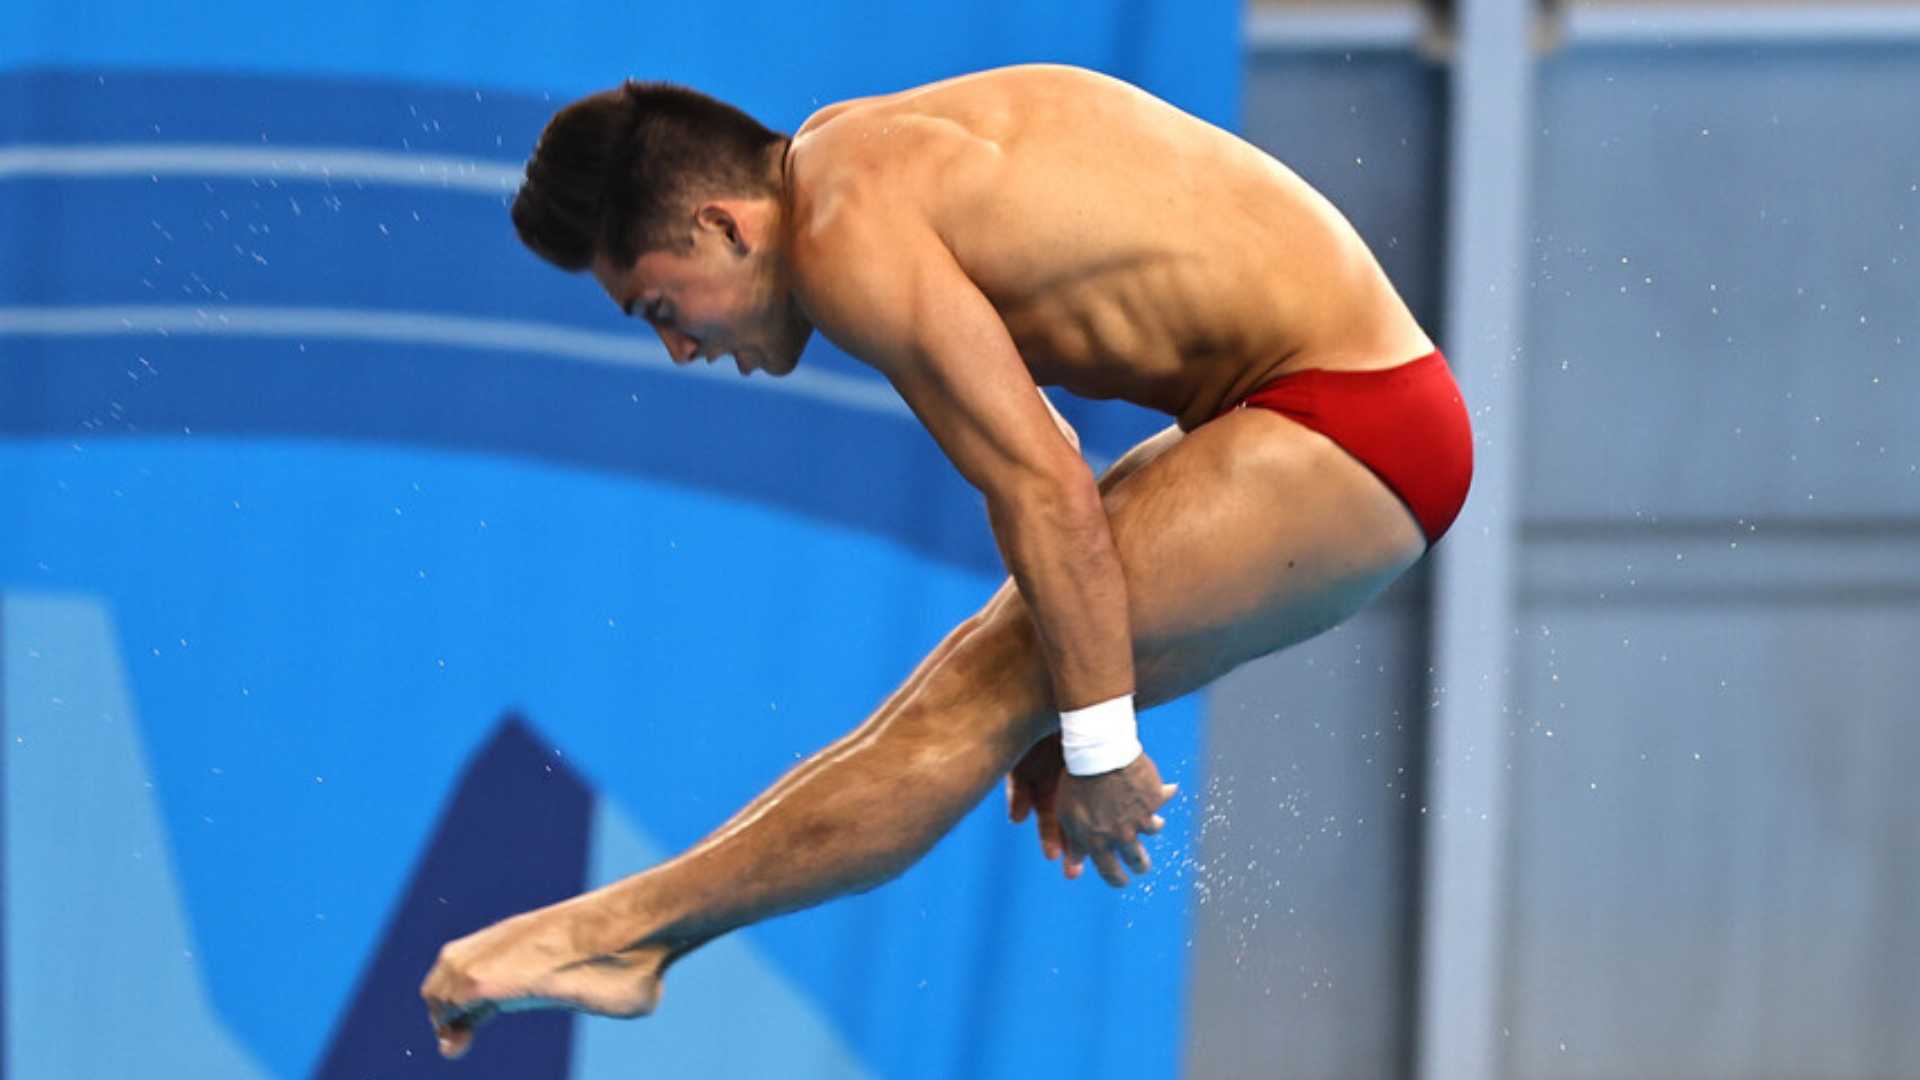 Mexican Randal Willars Amazes with a World-Class Dive in the Qualifications